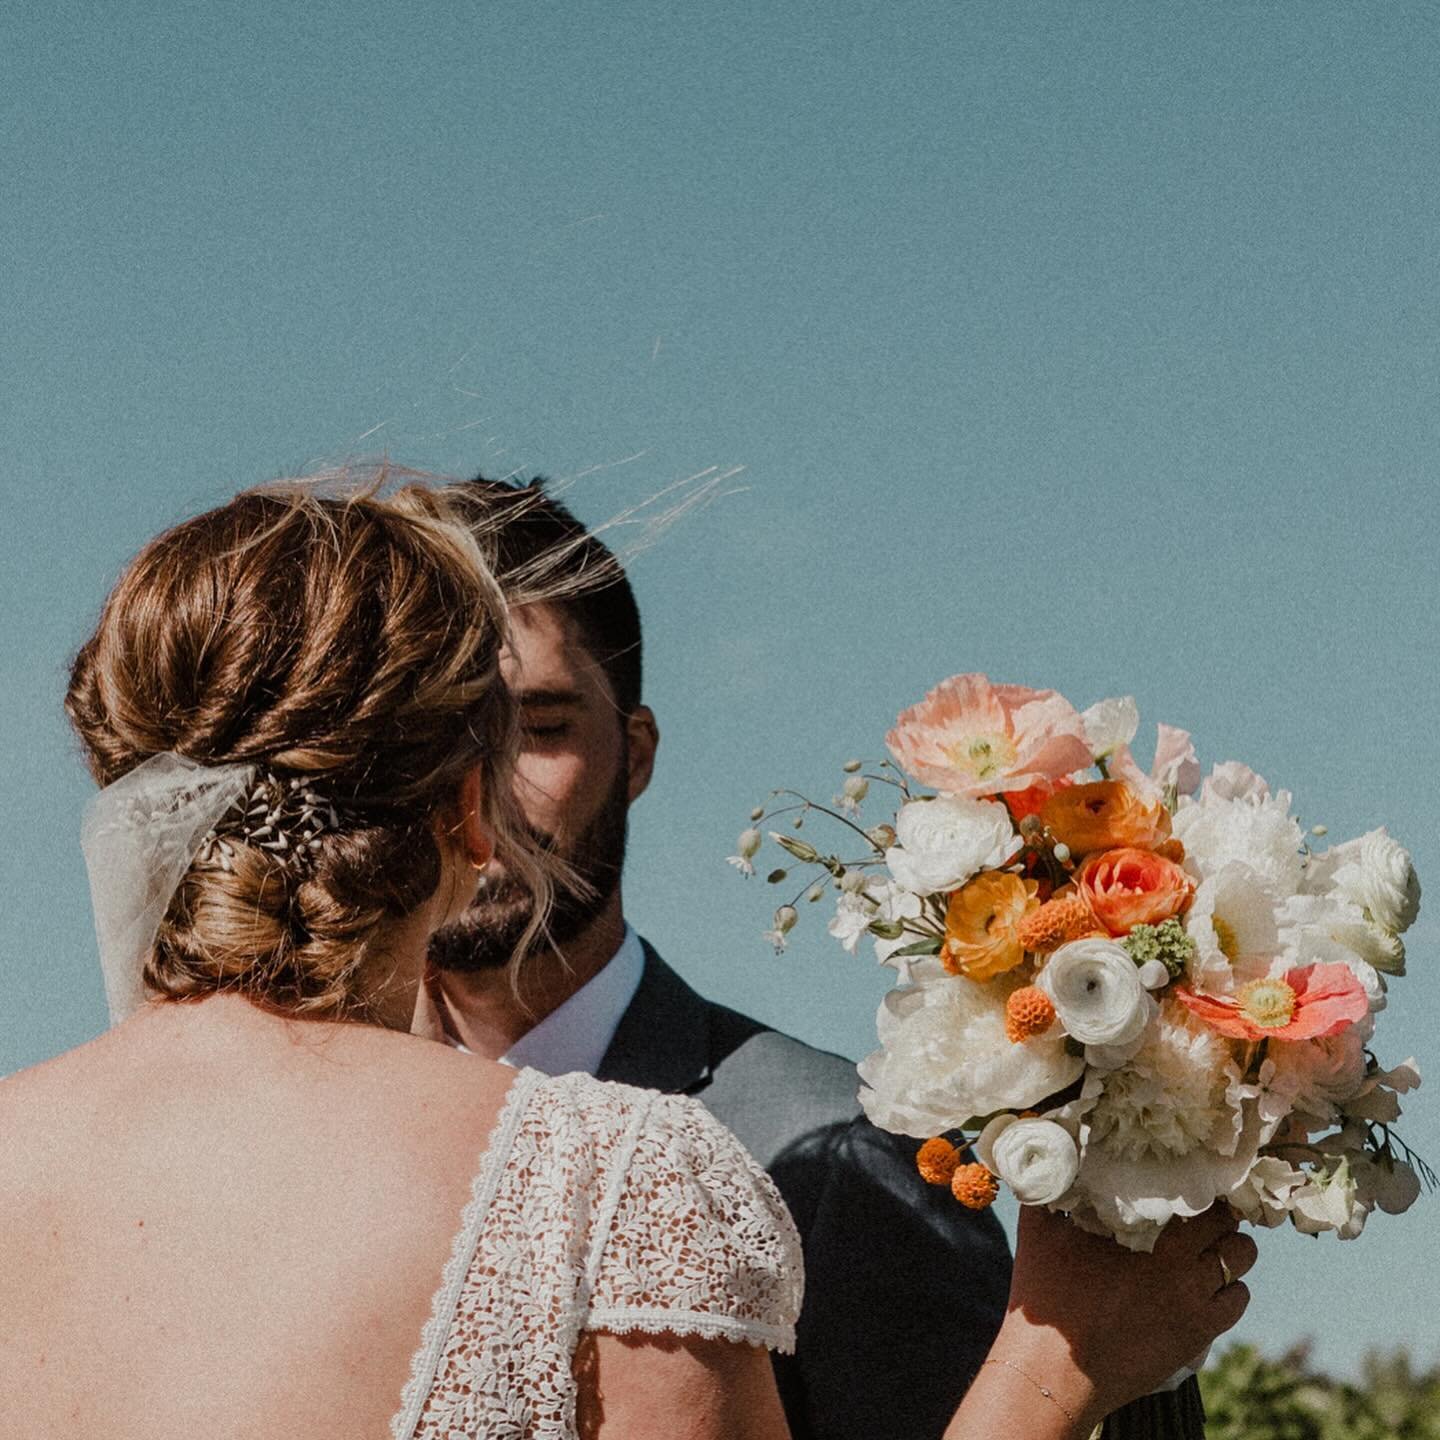 .
this incredible day at @theorchard.hr it was all: blue skies and orange flowers and the mountain was like a poem in the background; it was a ceremony with breezes that swooped veils into the air and a cake with tiny edible blossoms and a blue wave 